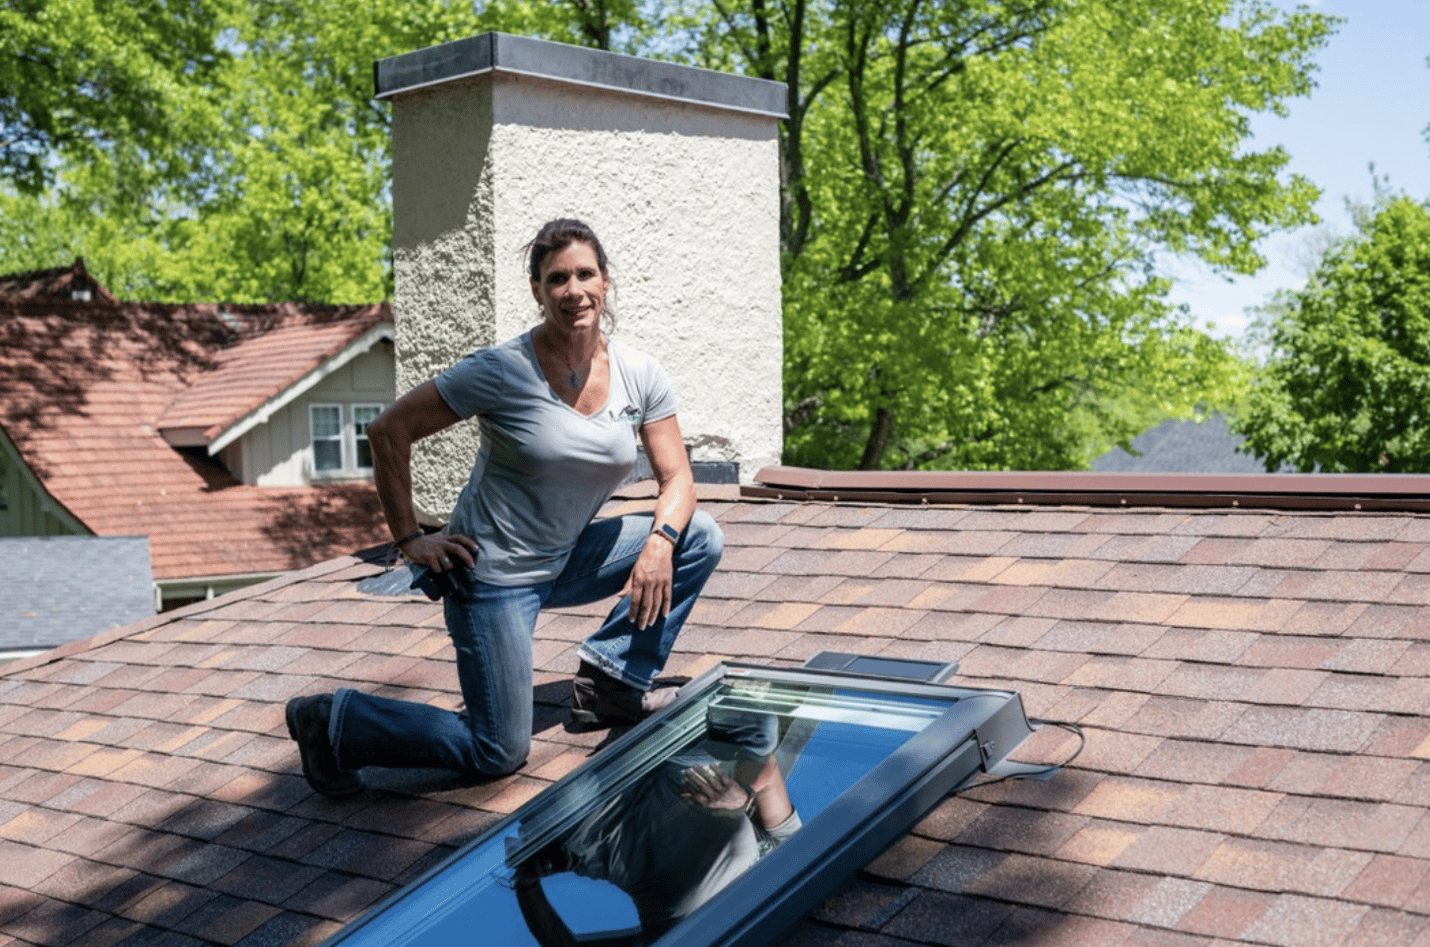 Lady On The Roof® installs quality VELUX® skylights enhancing the aesthetic and lighting of your home. Cleaner, quieter, and safer than any skylight glass on the market today. No leaks. No worries. 